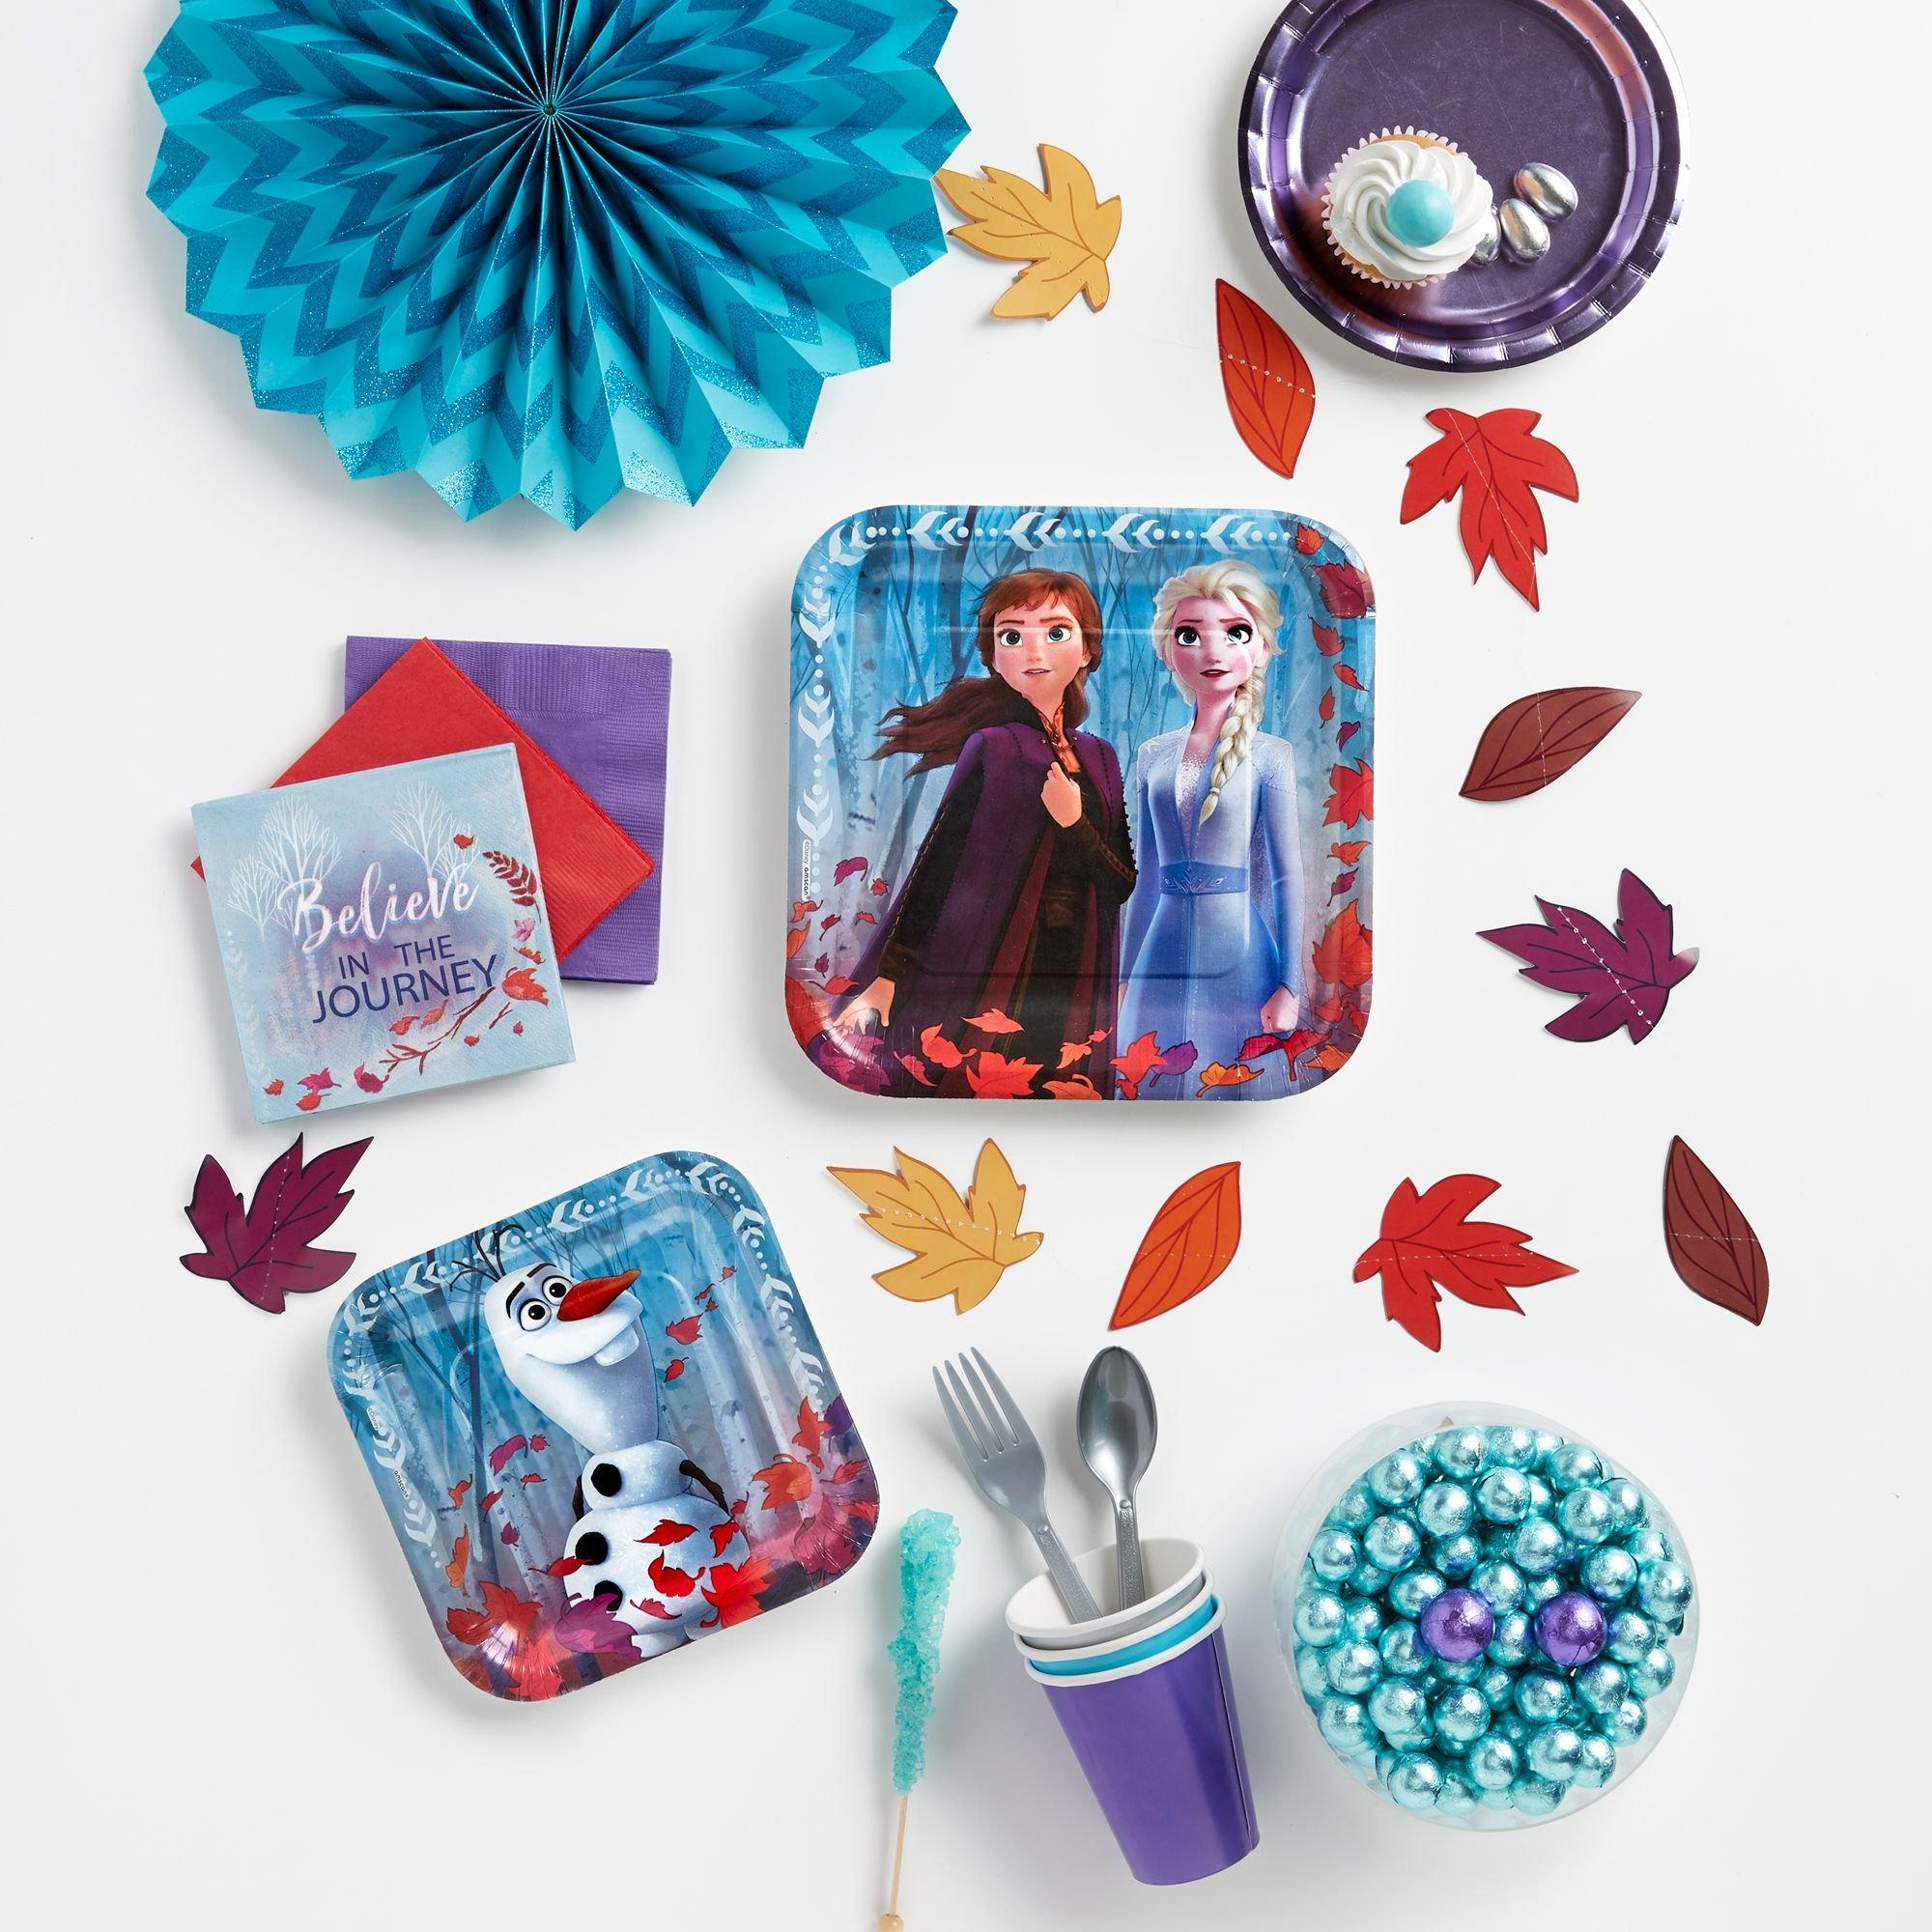 Personalized Frozen 2 Lunch Box - Sparkle & Ice – Dibsies Personalization  Station